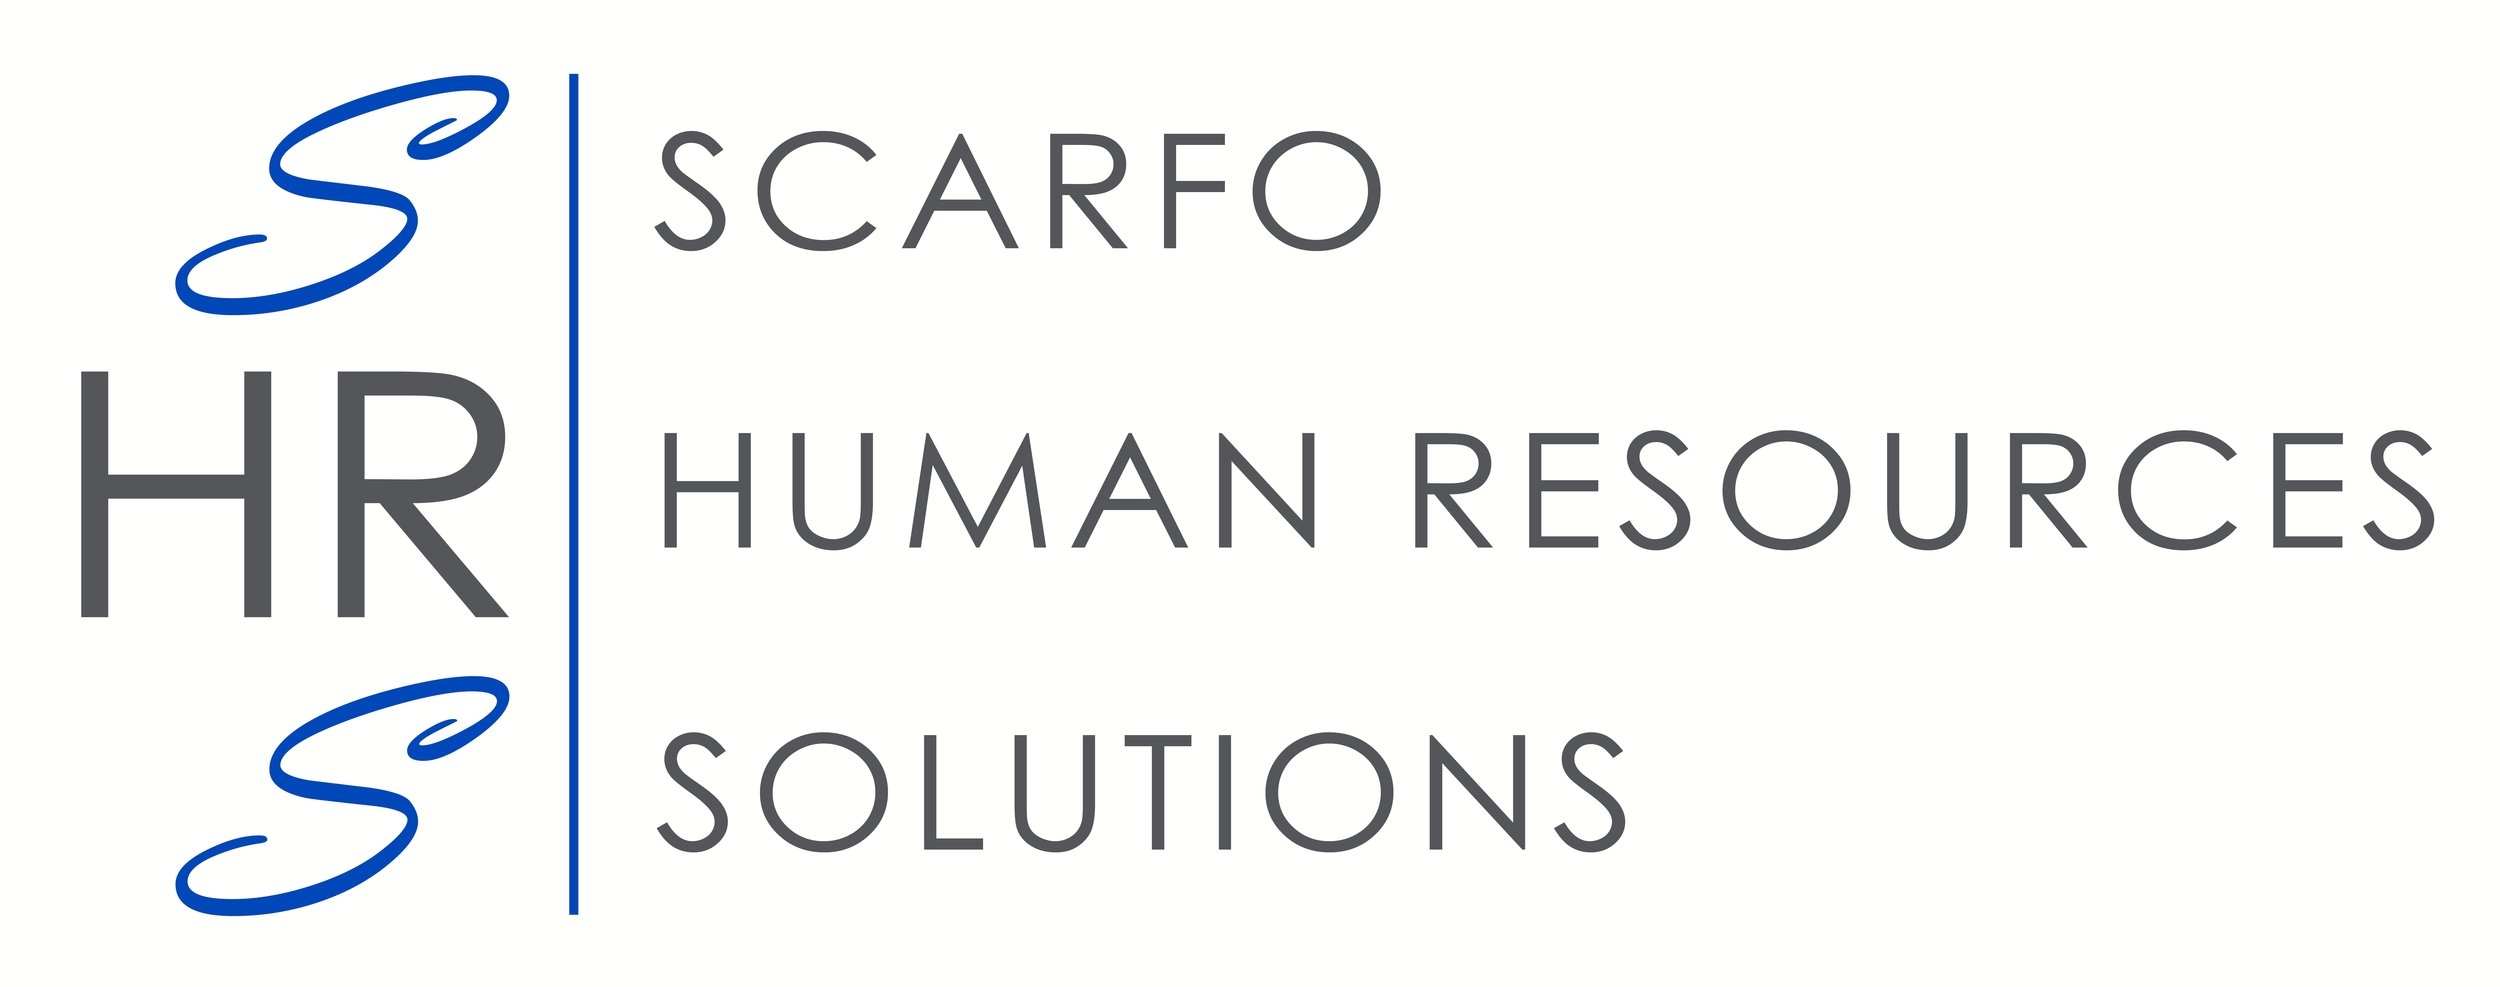 Scarfo HR Solutions